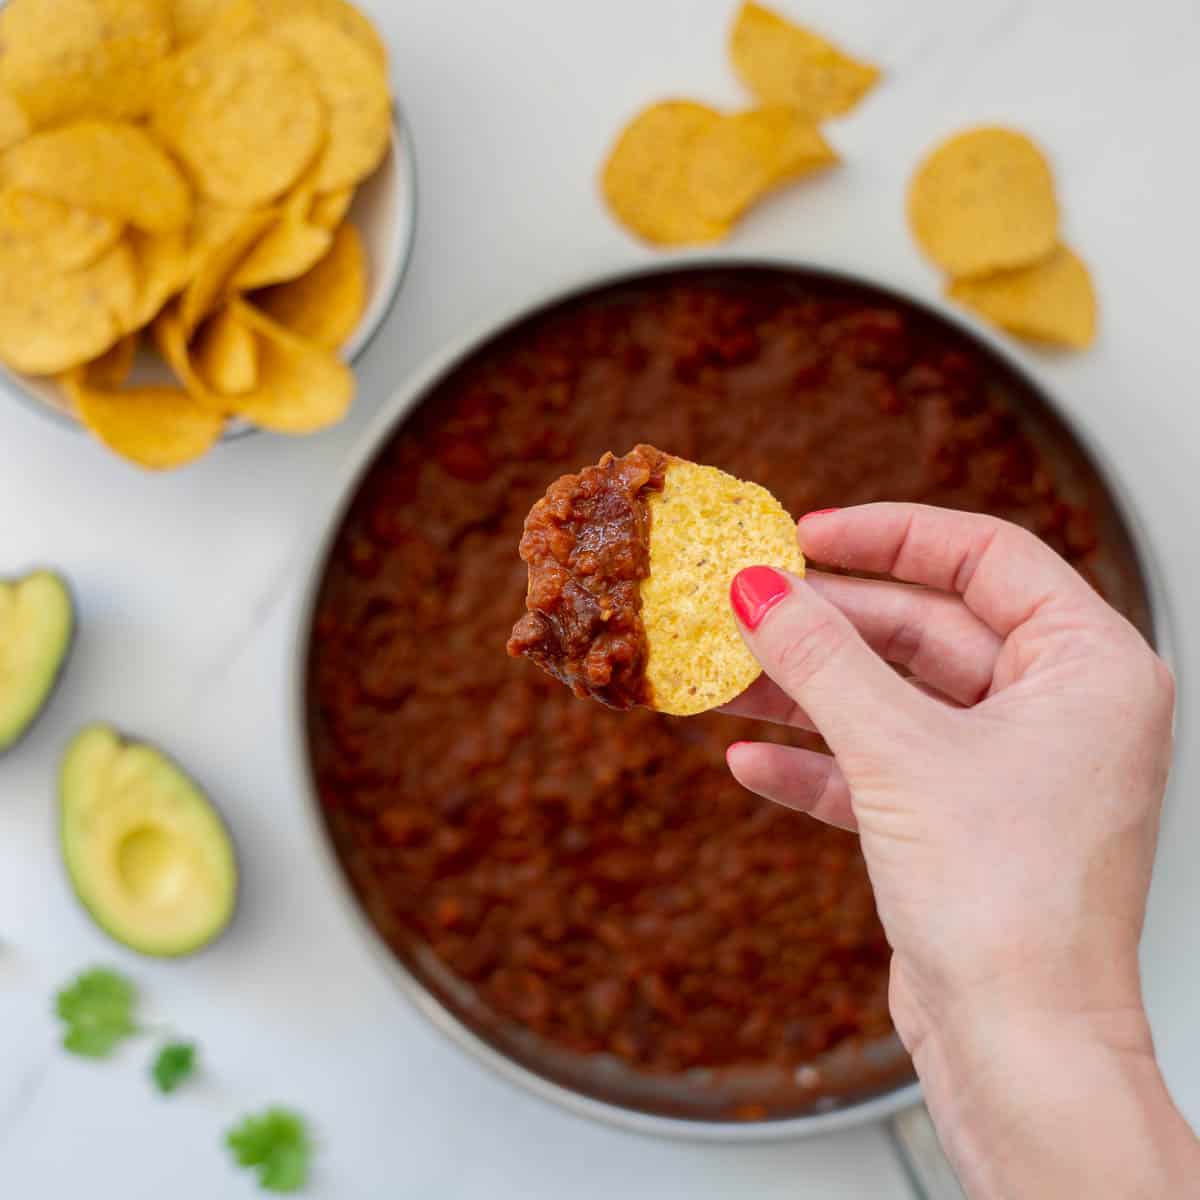 A corn chip loaded with bean based nacho mix, avocado and sour cream being held above a dinner table.